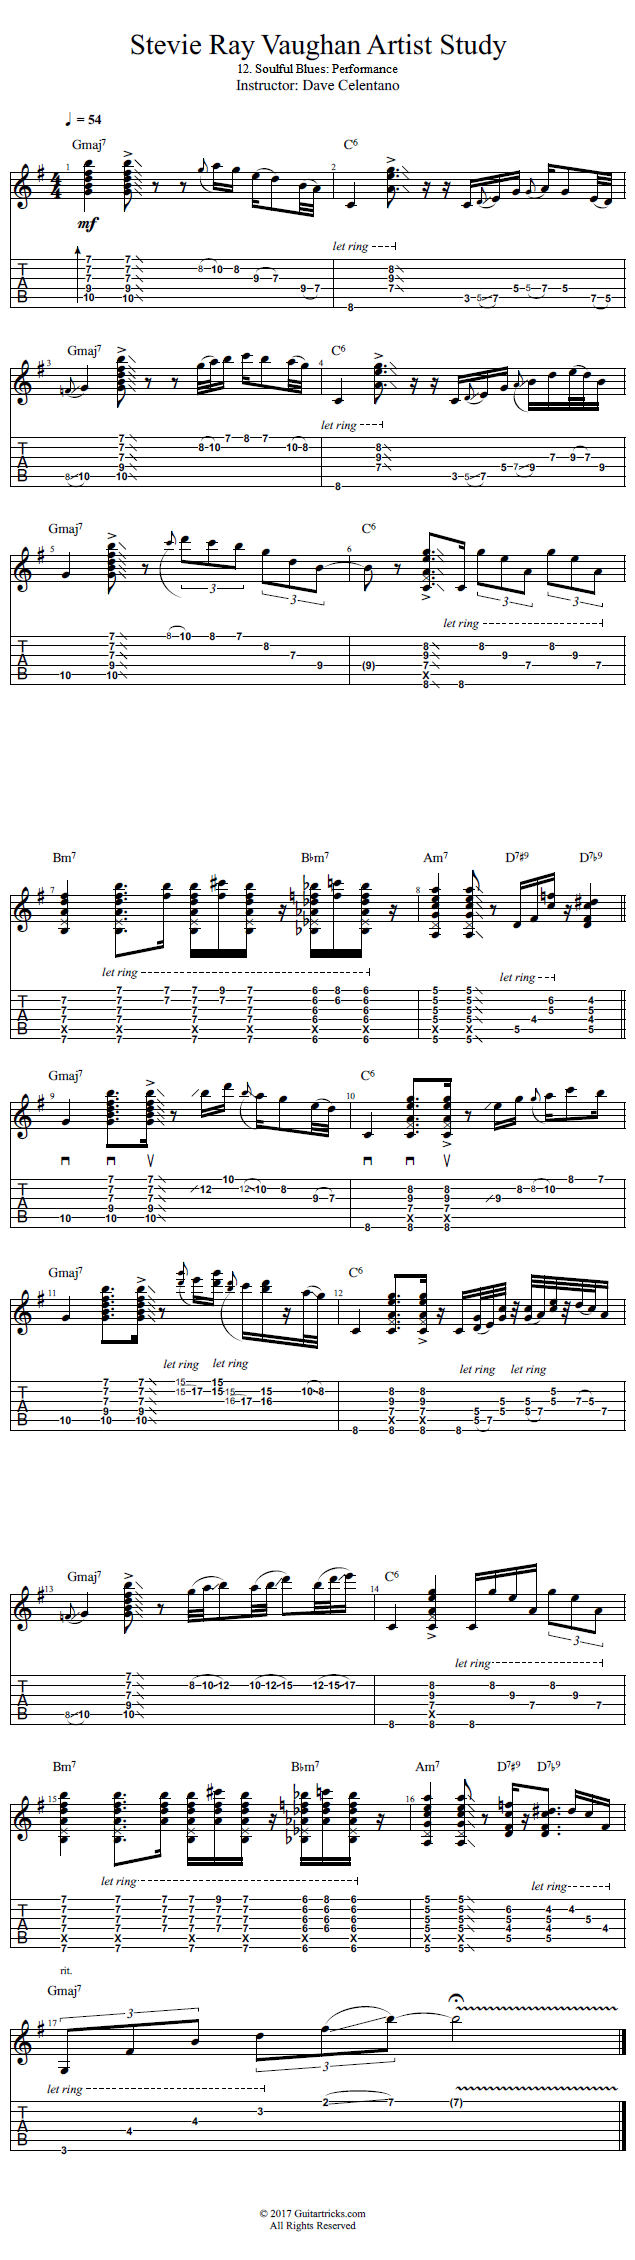 Soulful Blues: Performance song notation